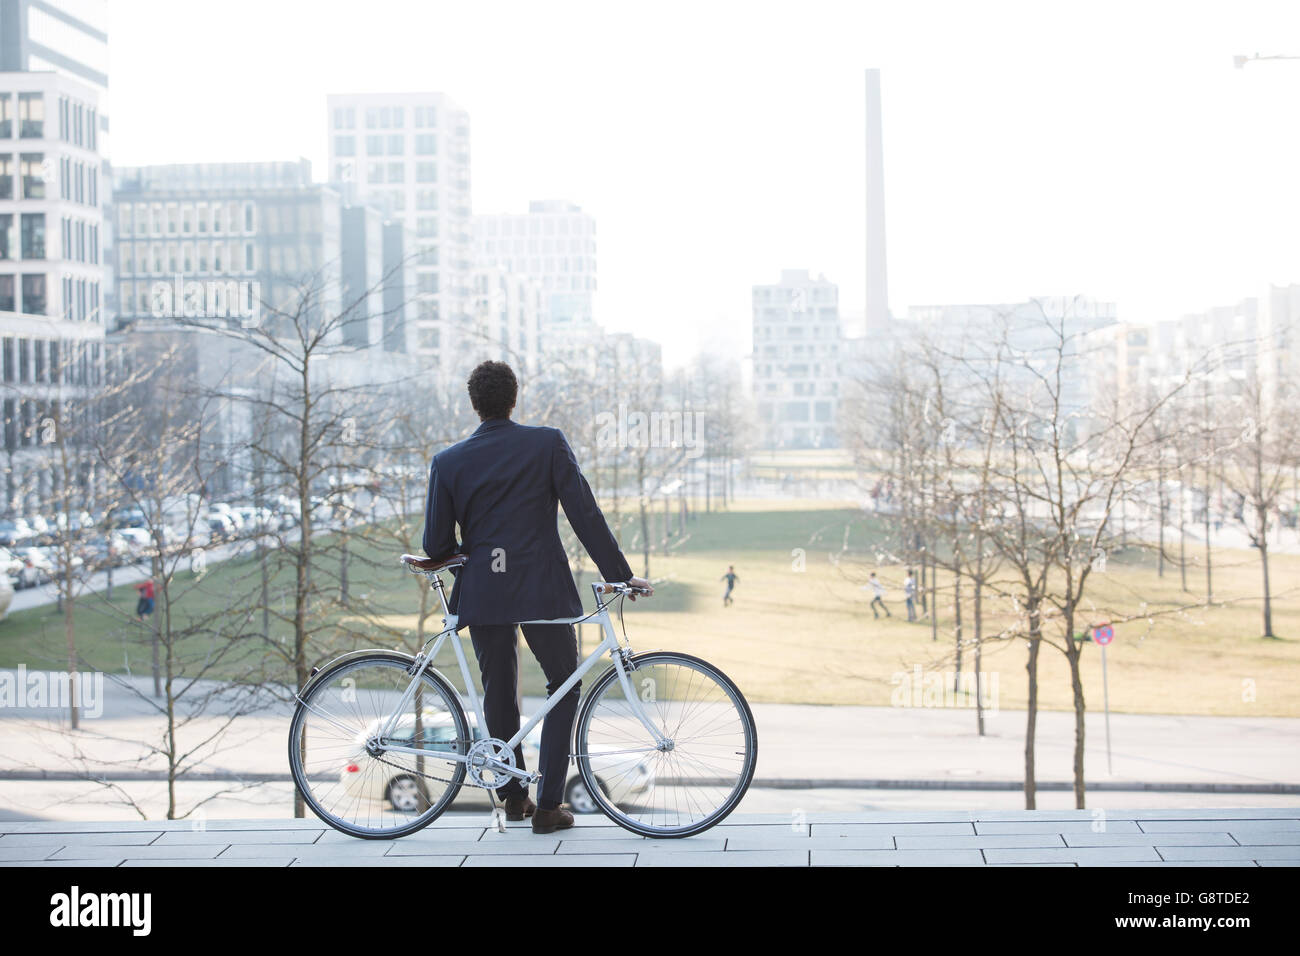 Businessman with bicycle taking a break in city Stock Photo